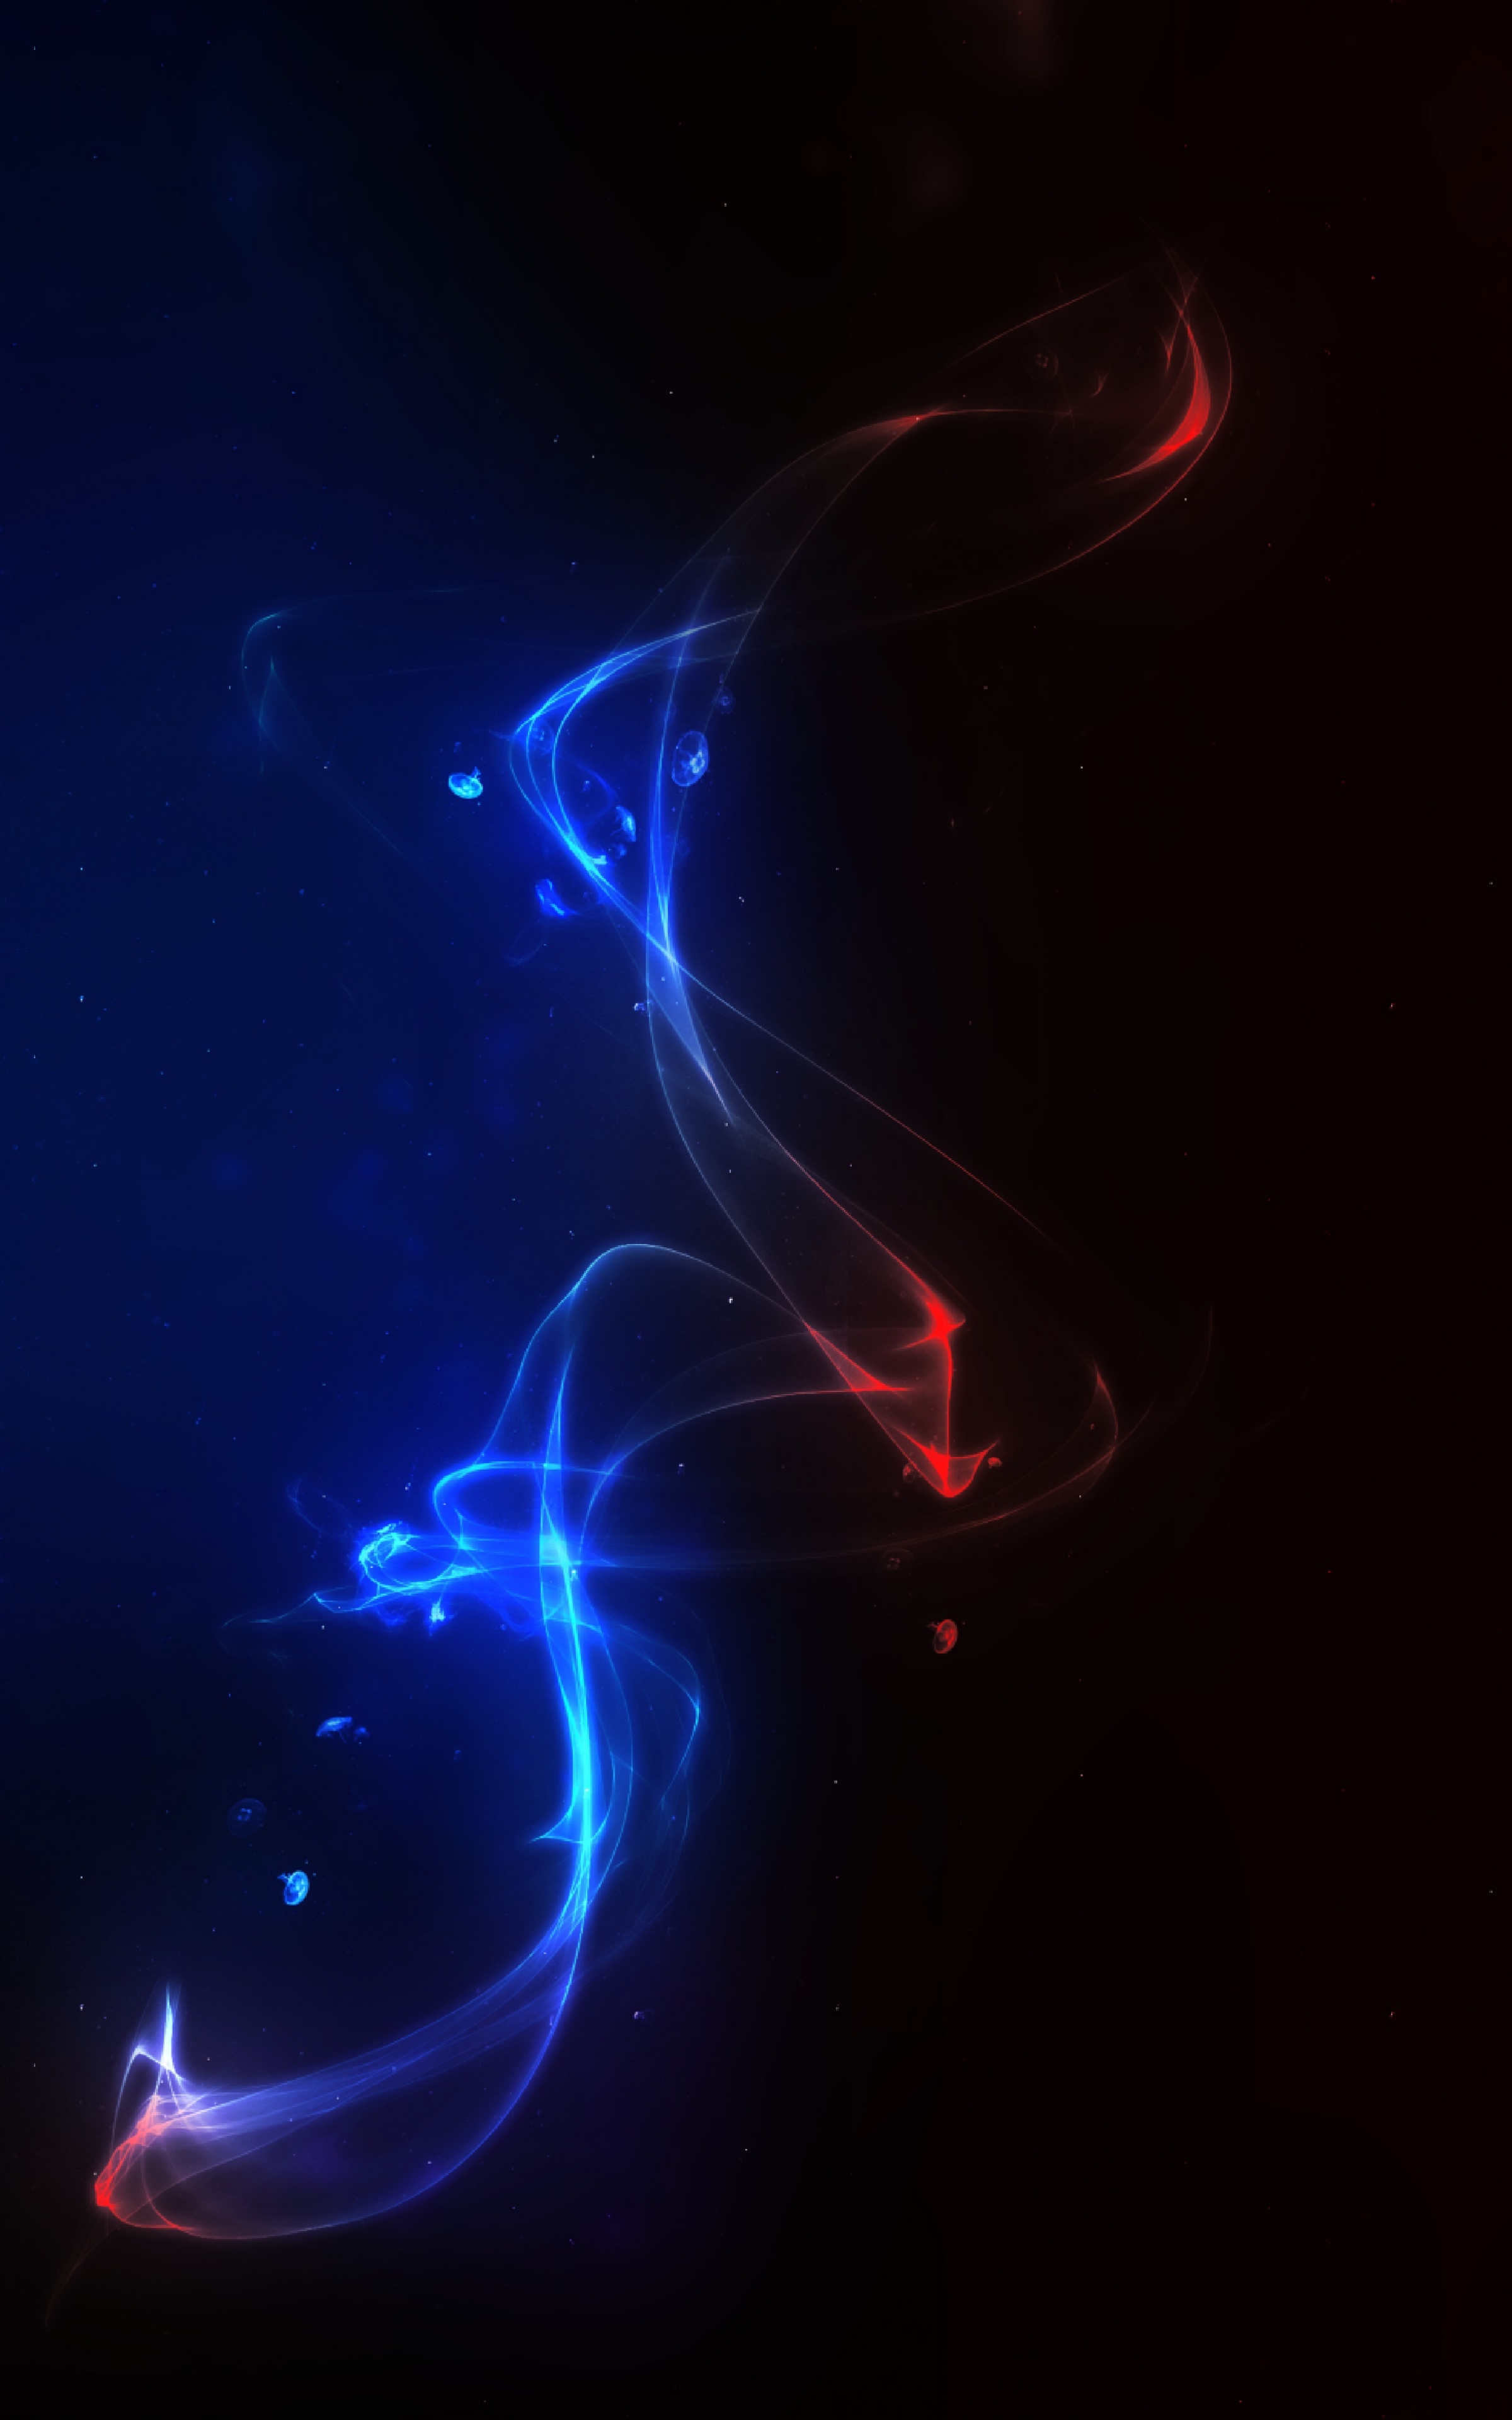 glow, energy, abstract, blue, red 1080p